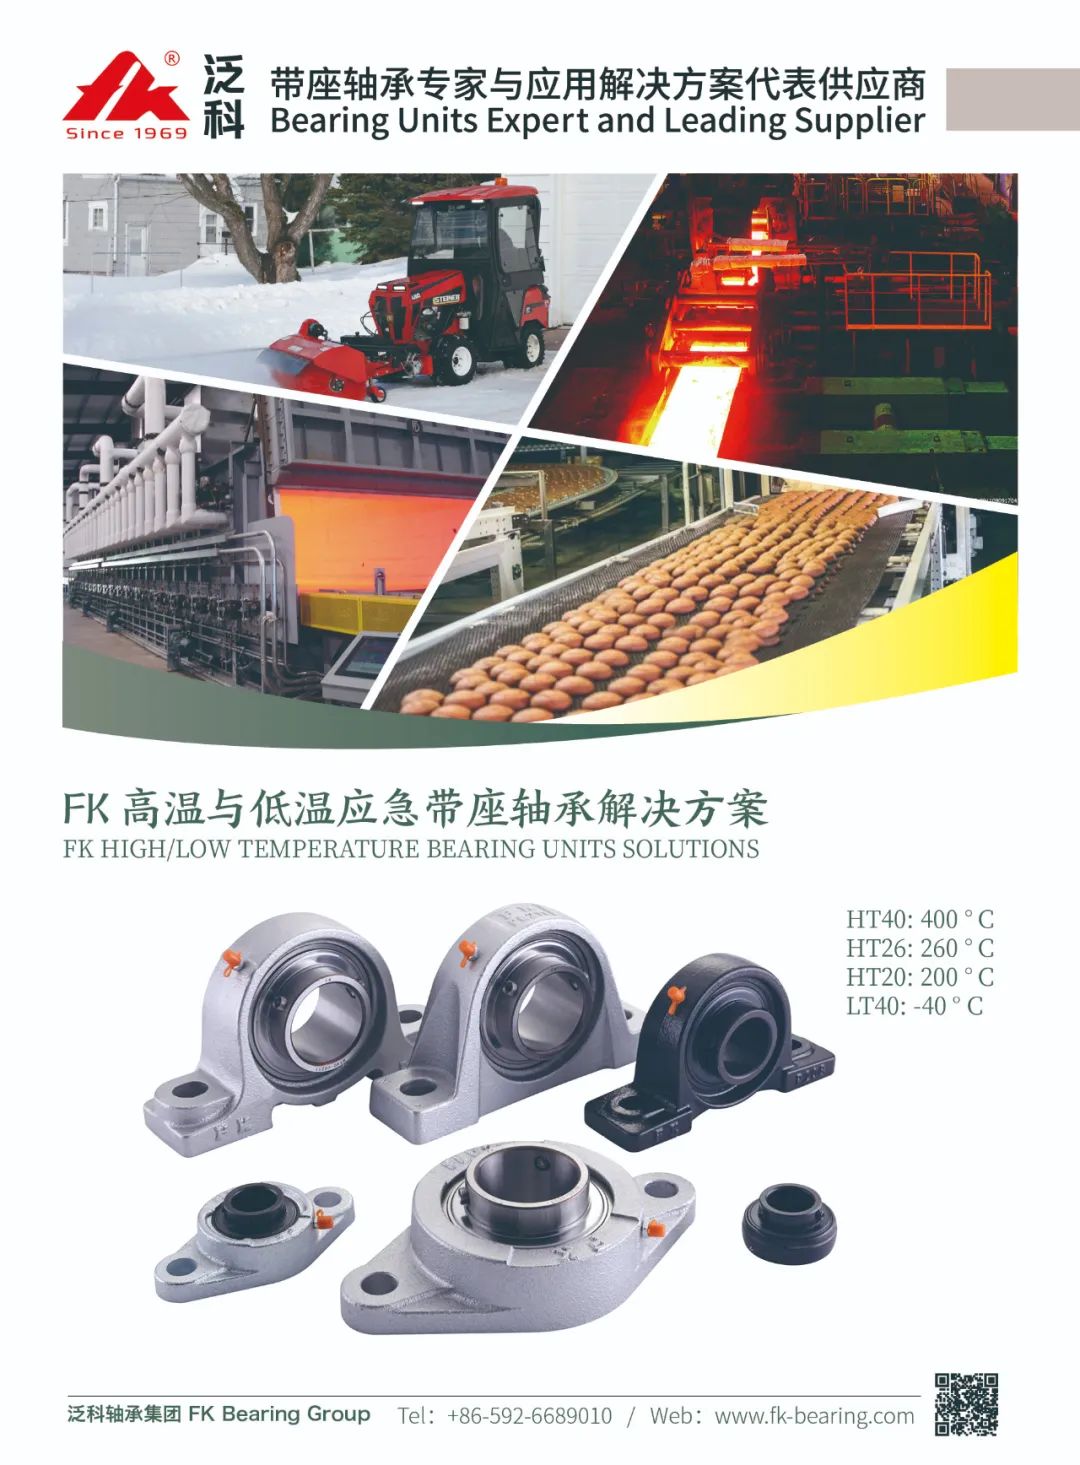 FK High Temperature Bearing Units are widely used in industrial ovens, high temperature spray rooms, food baking equipment, medical supplies production lines, heat treatment production lines, etc.